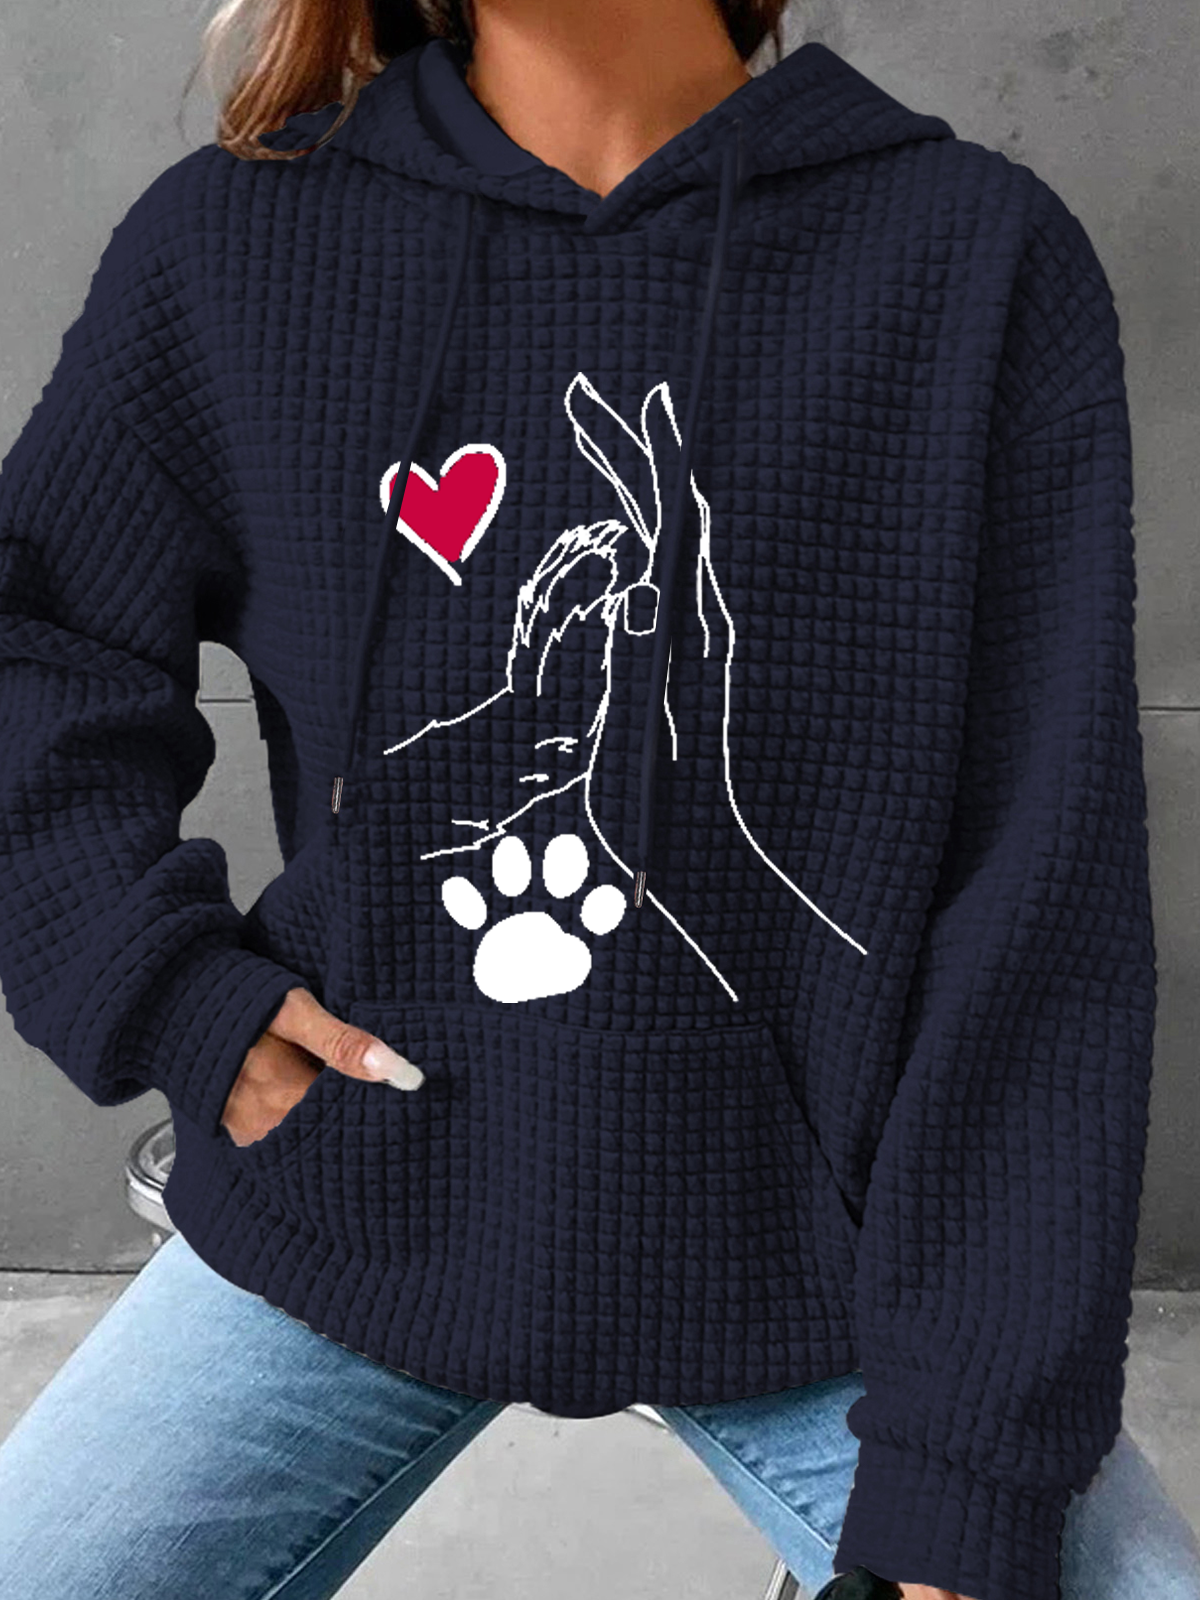 Women's Palm High-Fives Dog Paw Print Simple Dog Hoodie Funny Valentines Hooded Sweatshirt Spring Long Sleeve White Black Pink Blue Gray Green